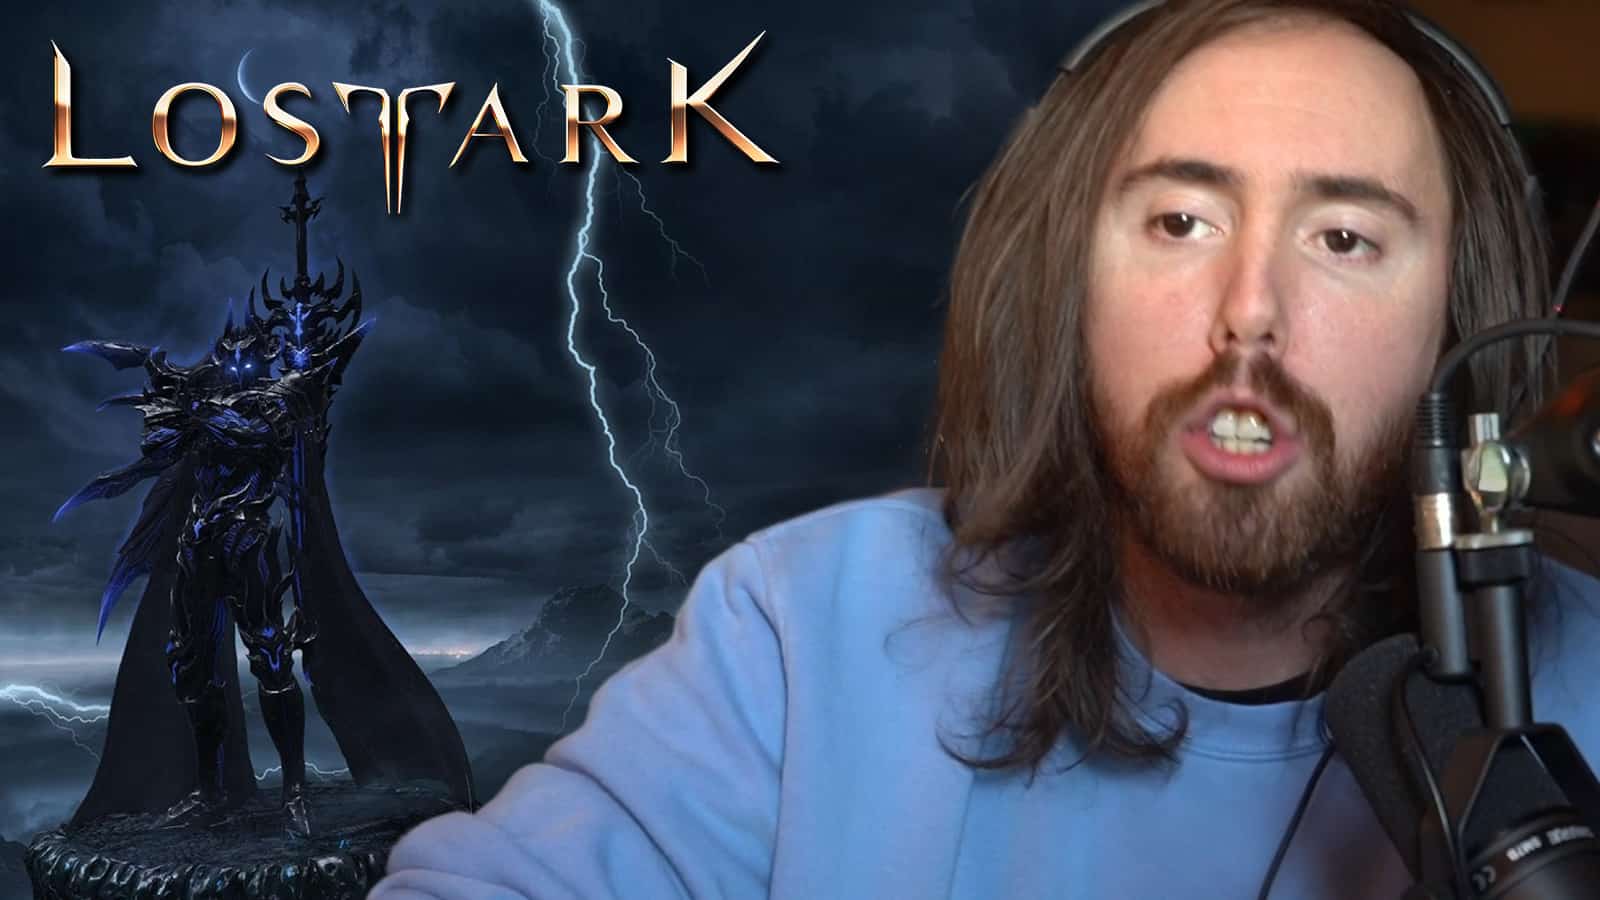 asmongold-lost-ark-gambling-twitch